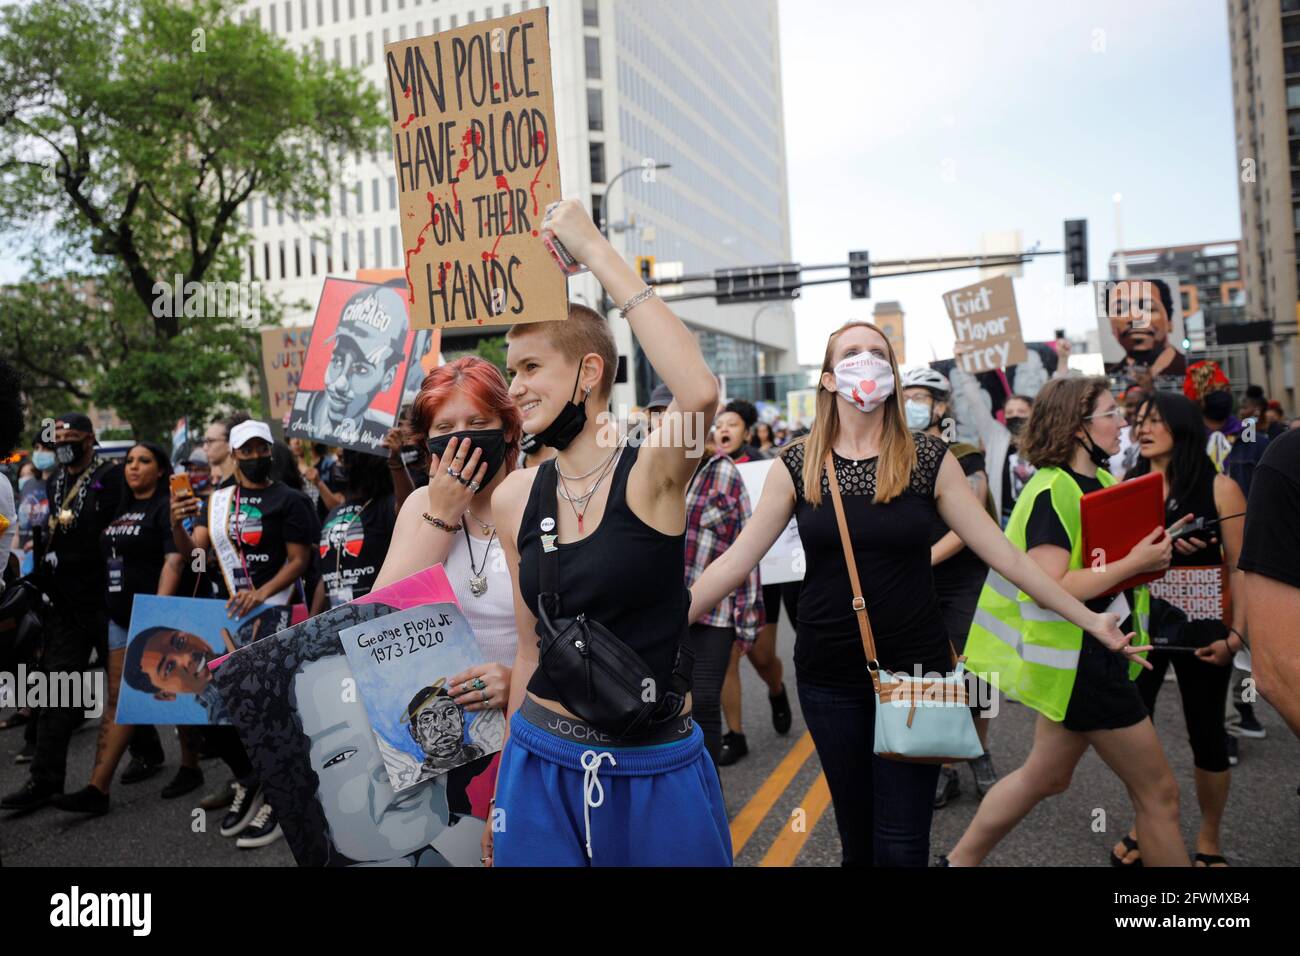 People march during the 'One Year, What's Changed?' rally hosted by the George Floyd Memorial Foundation  to commemorate the first anniversary of his death, in Minneapolis, Minnesota, U.S. May 23, 2021. REUTERS/Nicholas Pfosi  REFILE - CORRECTING NAME OF THE ORGANIZATION Stock Photo